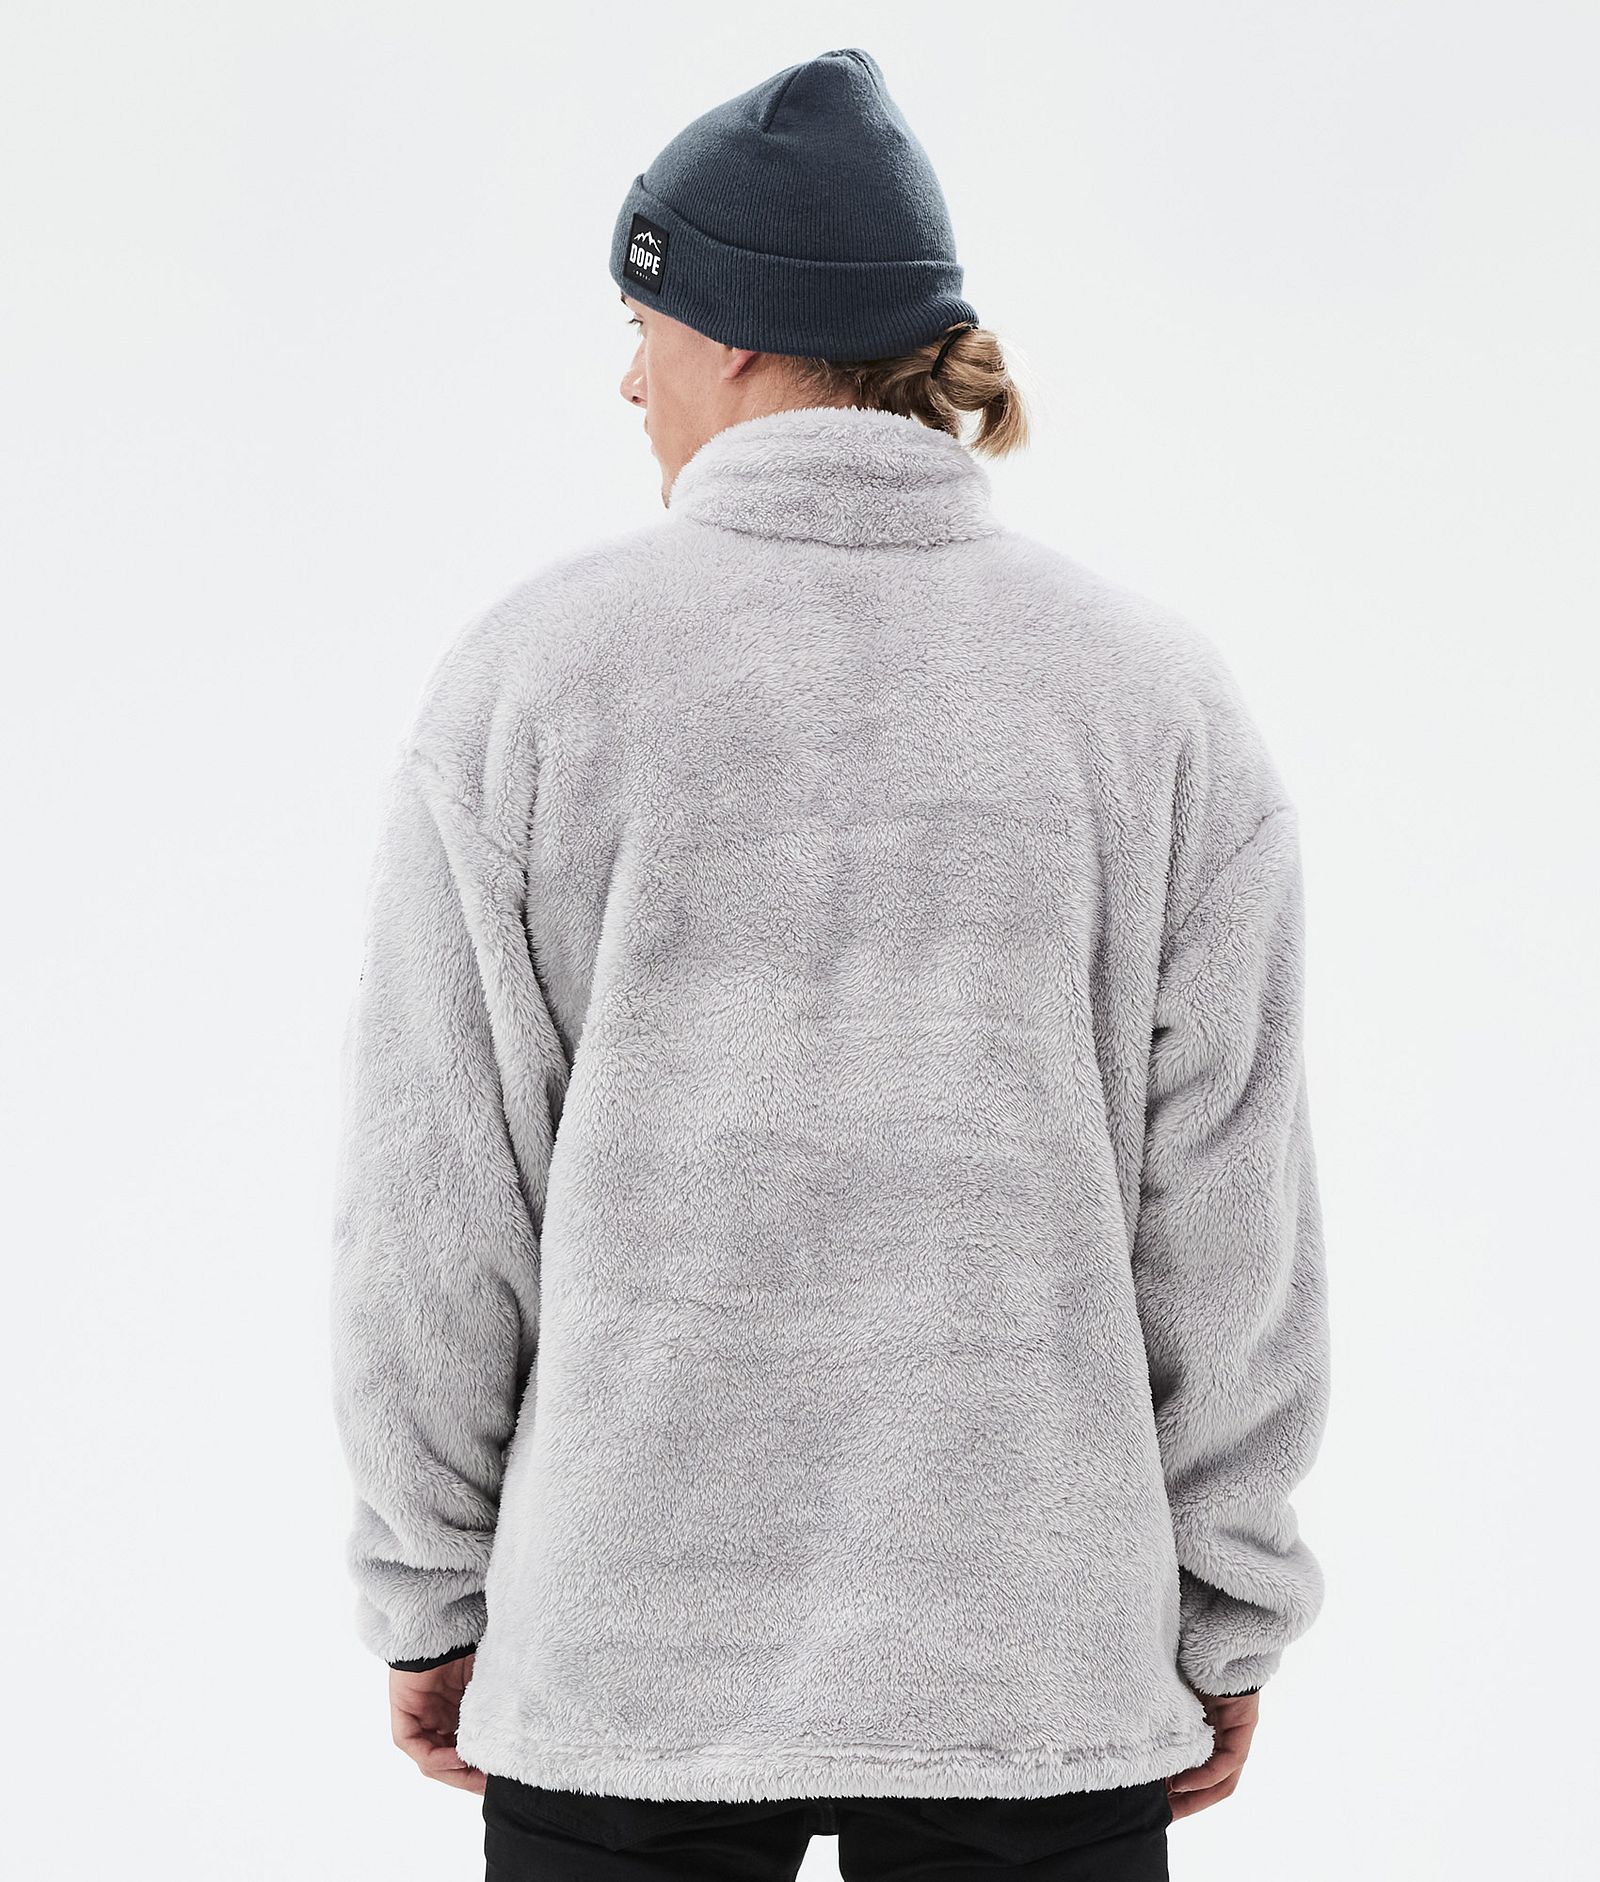 Dope Pile Sweat Polaire Homme Light Grey Renewed